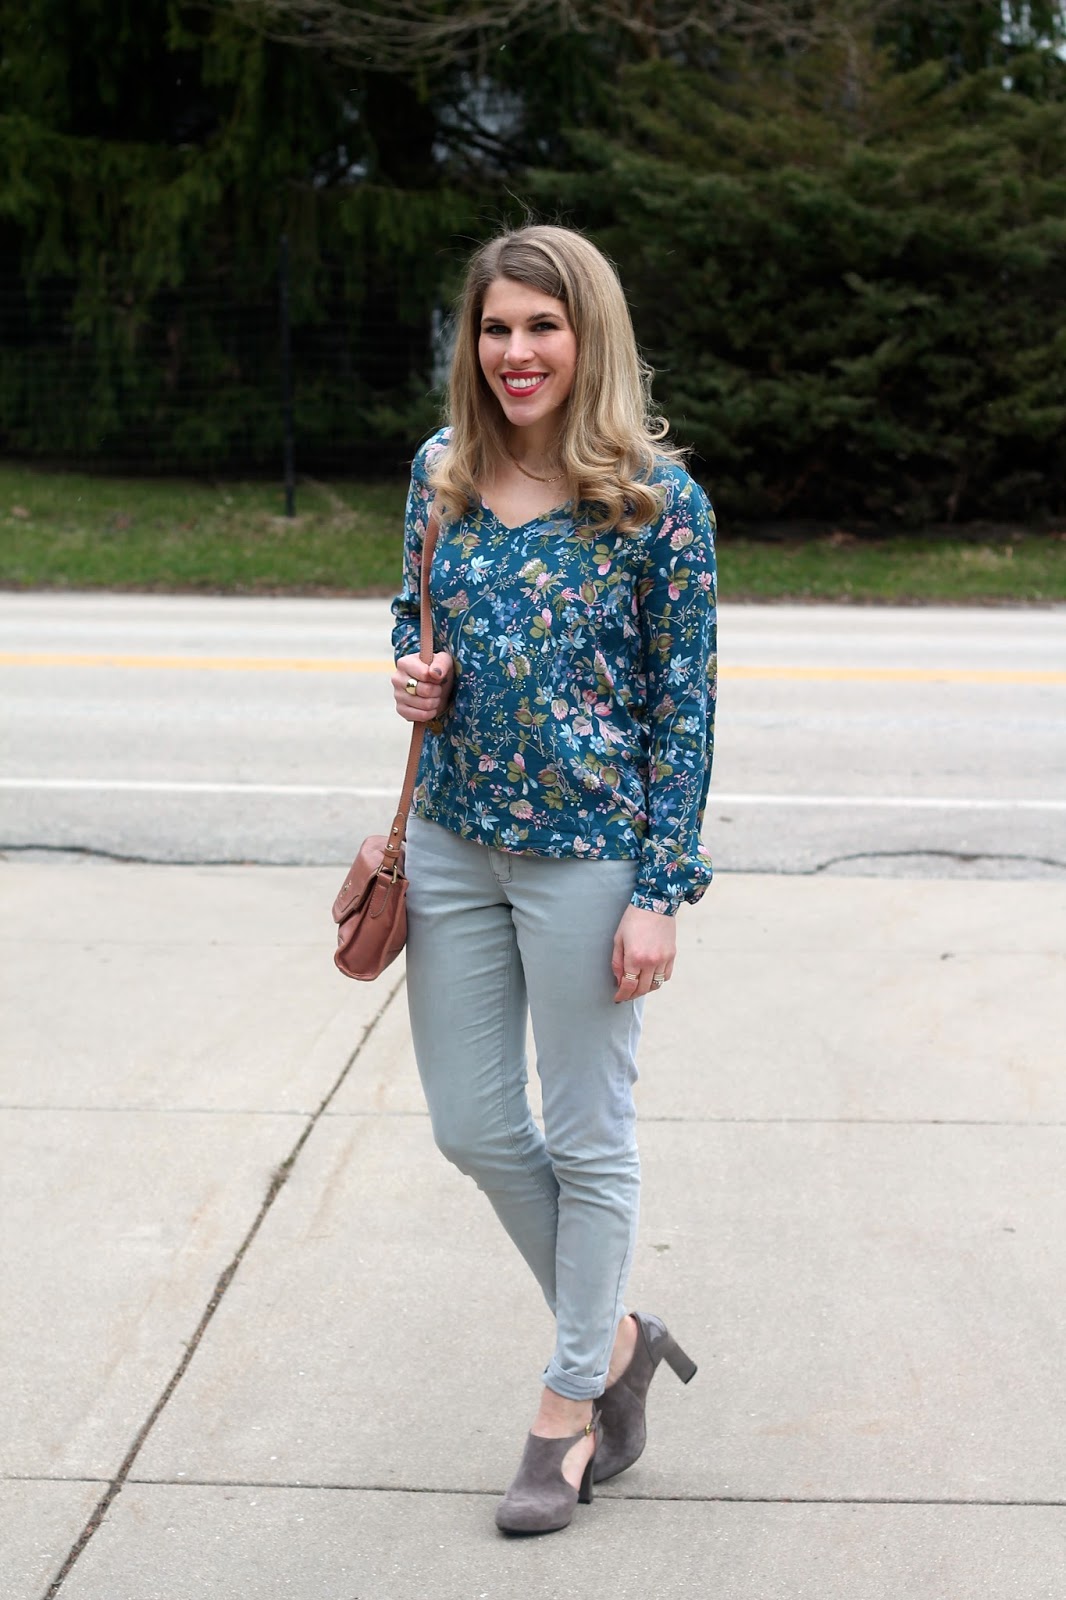 Finding the Right Floral & Confident Twosday Linkup